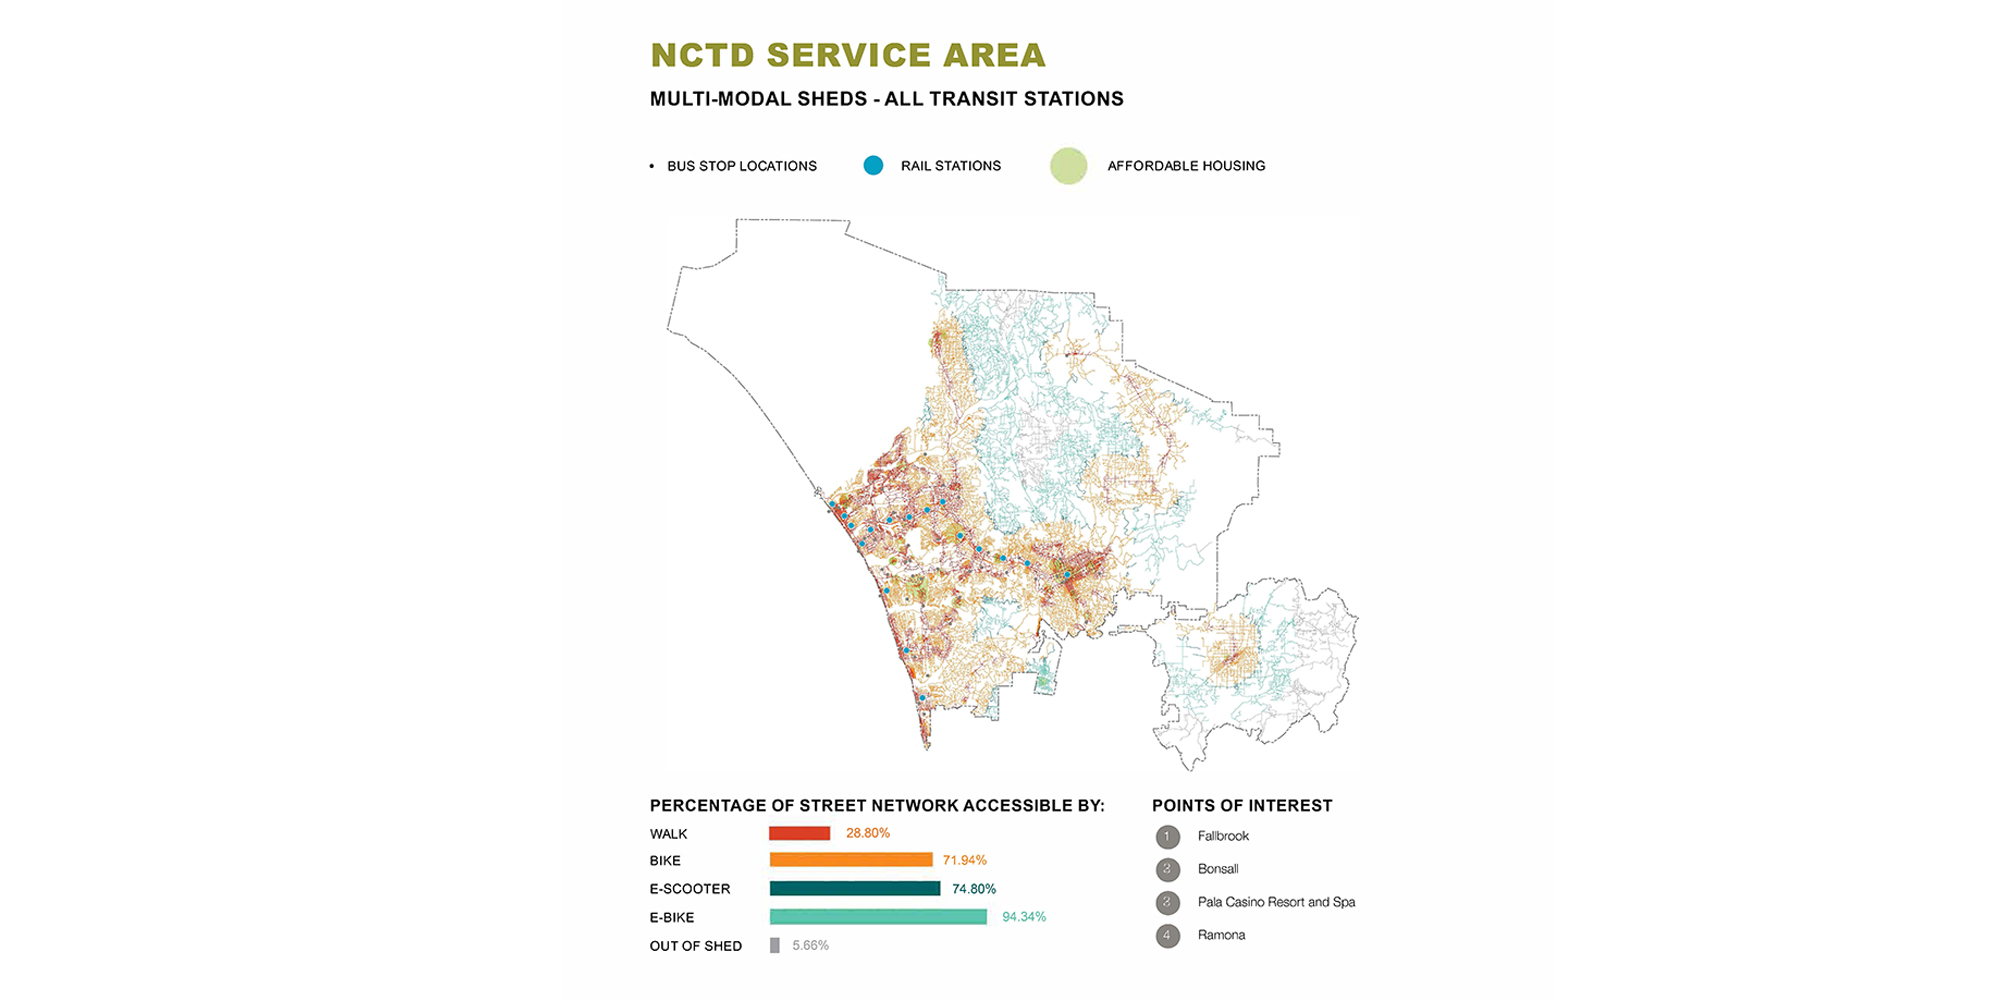 NCTD service area, inclouding multi-modal sheds and all transit stations. For full text, download project pdf below.